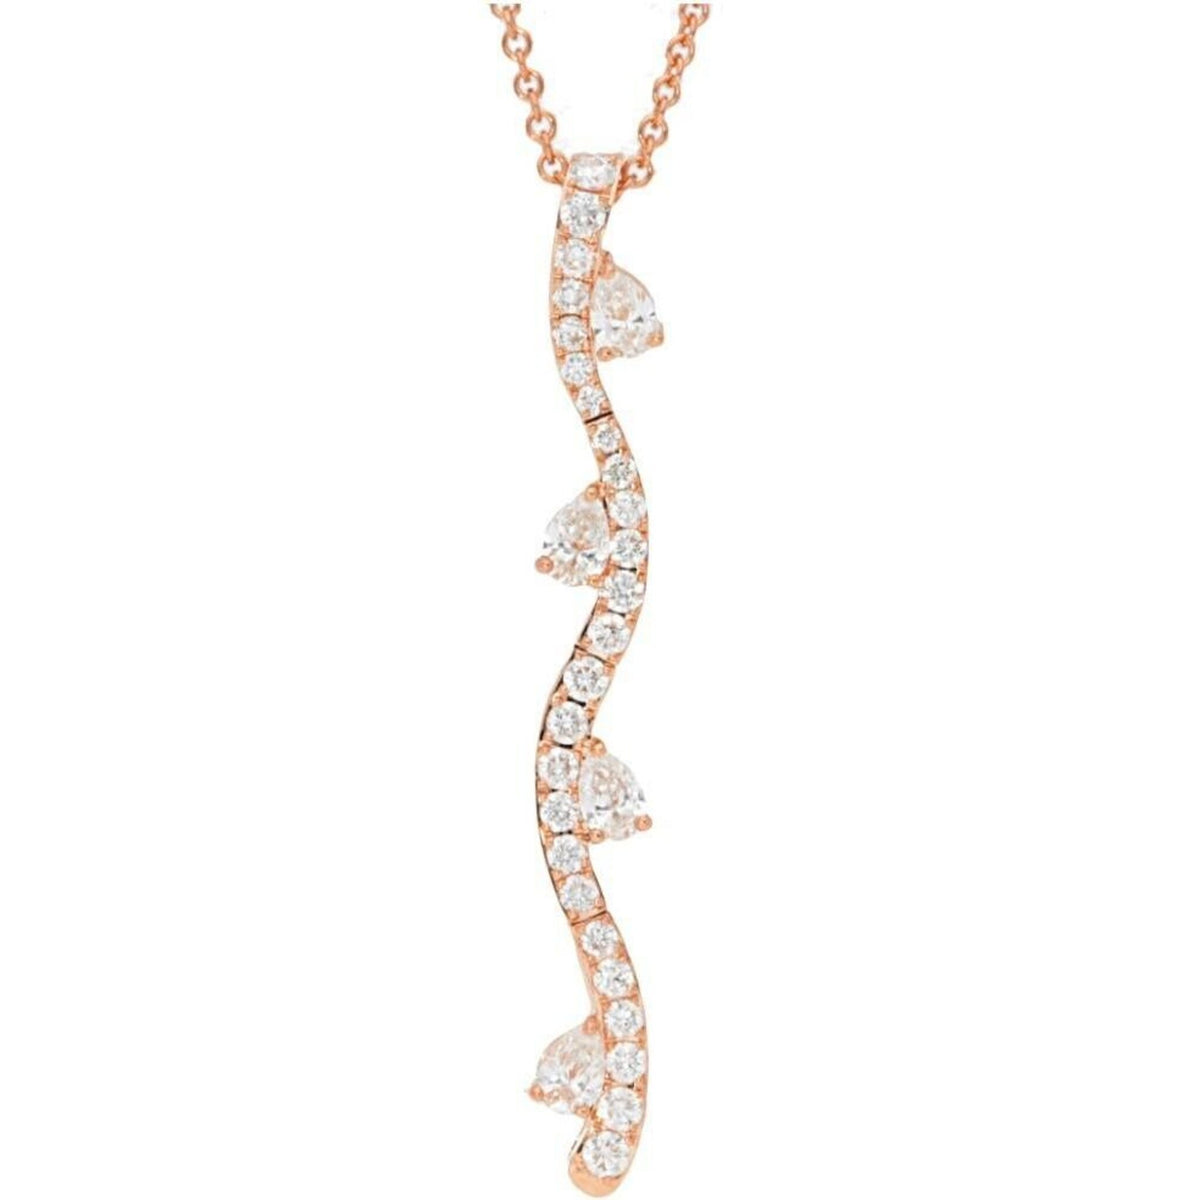 Sofer Jewelry - Wavy Pave Diamond Drop With Pear Diamond Pendant in 14K Rose Gold